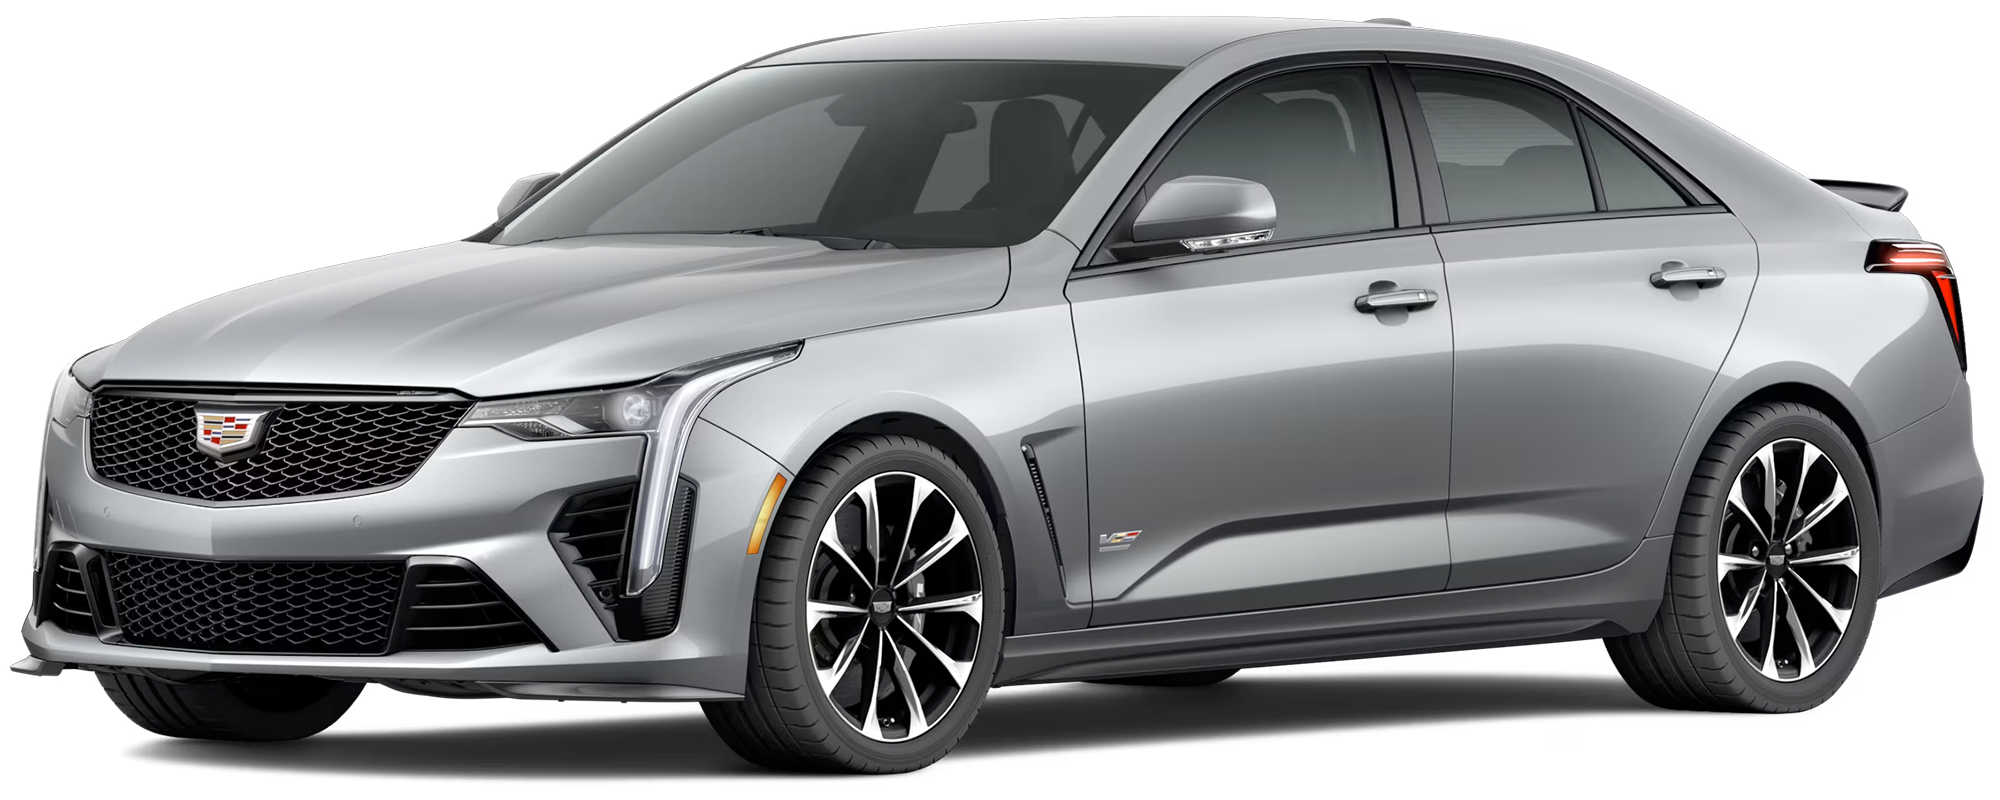 cadillac-incentives-rebates-specials-in-austin-tx-cadillac-finance-and-lease-deals-covert